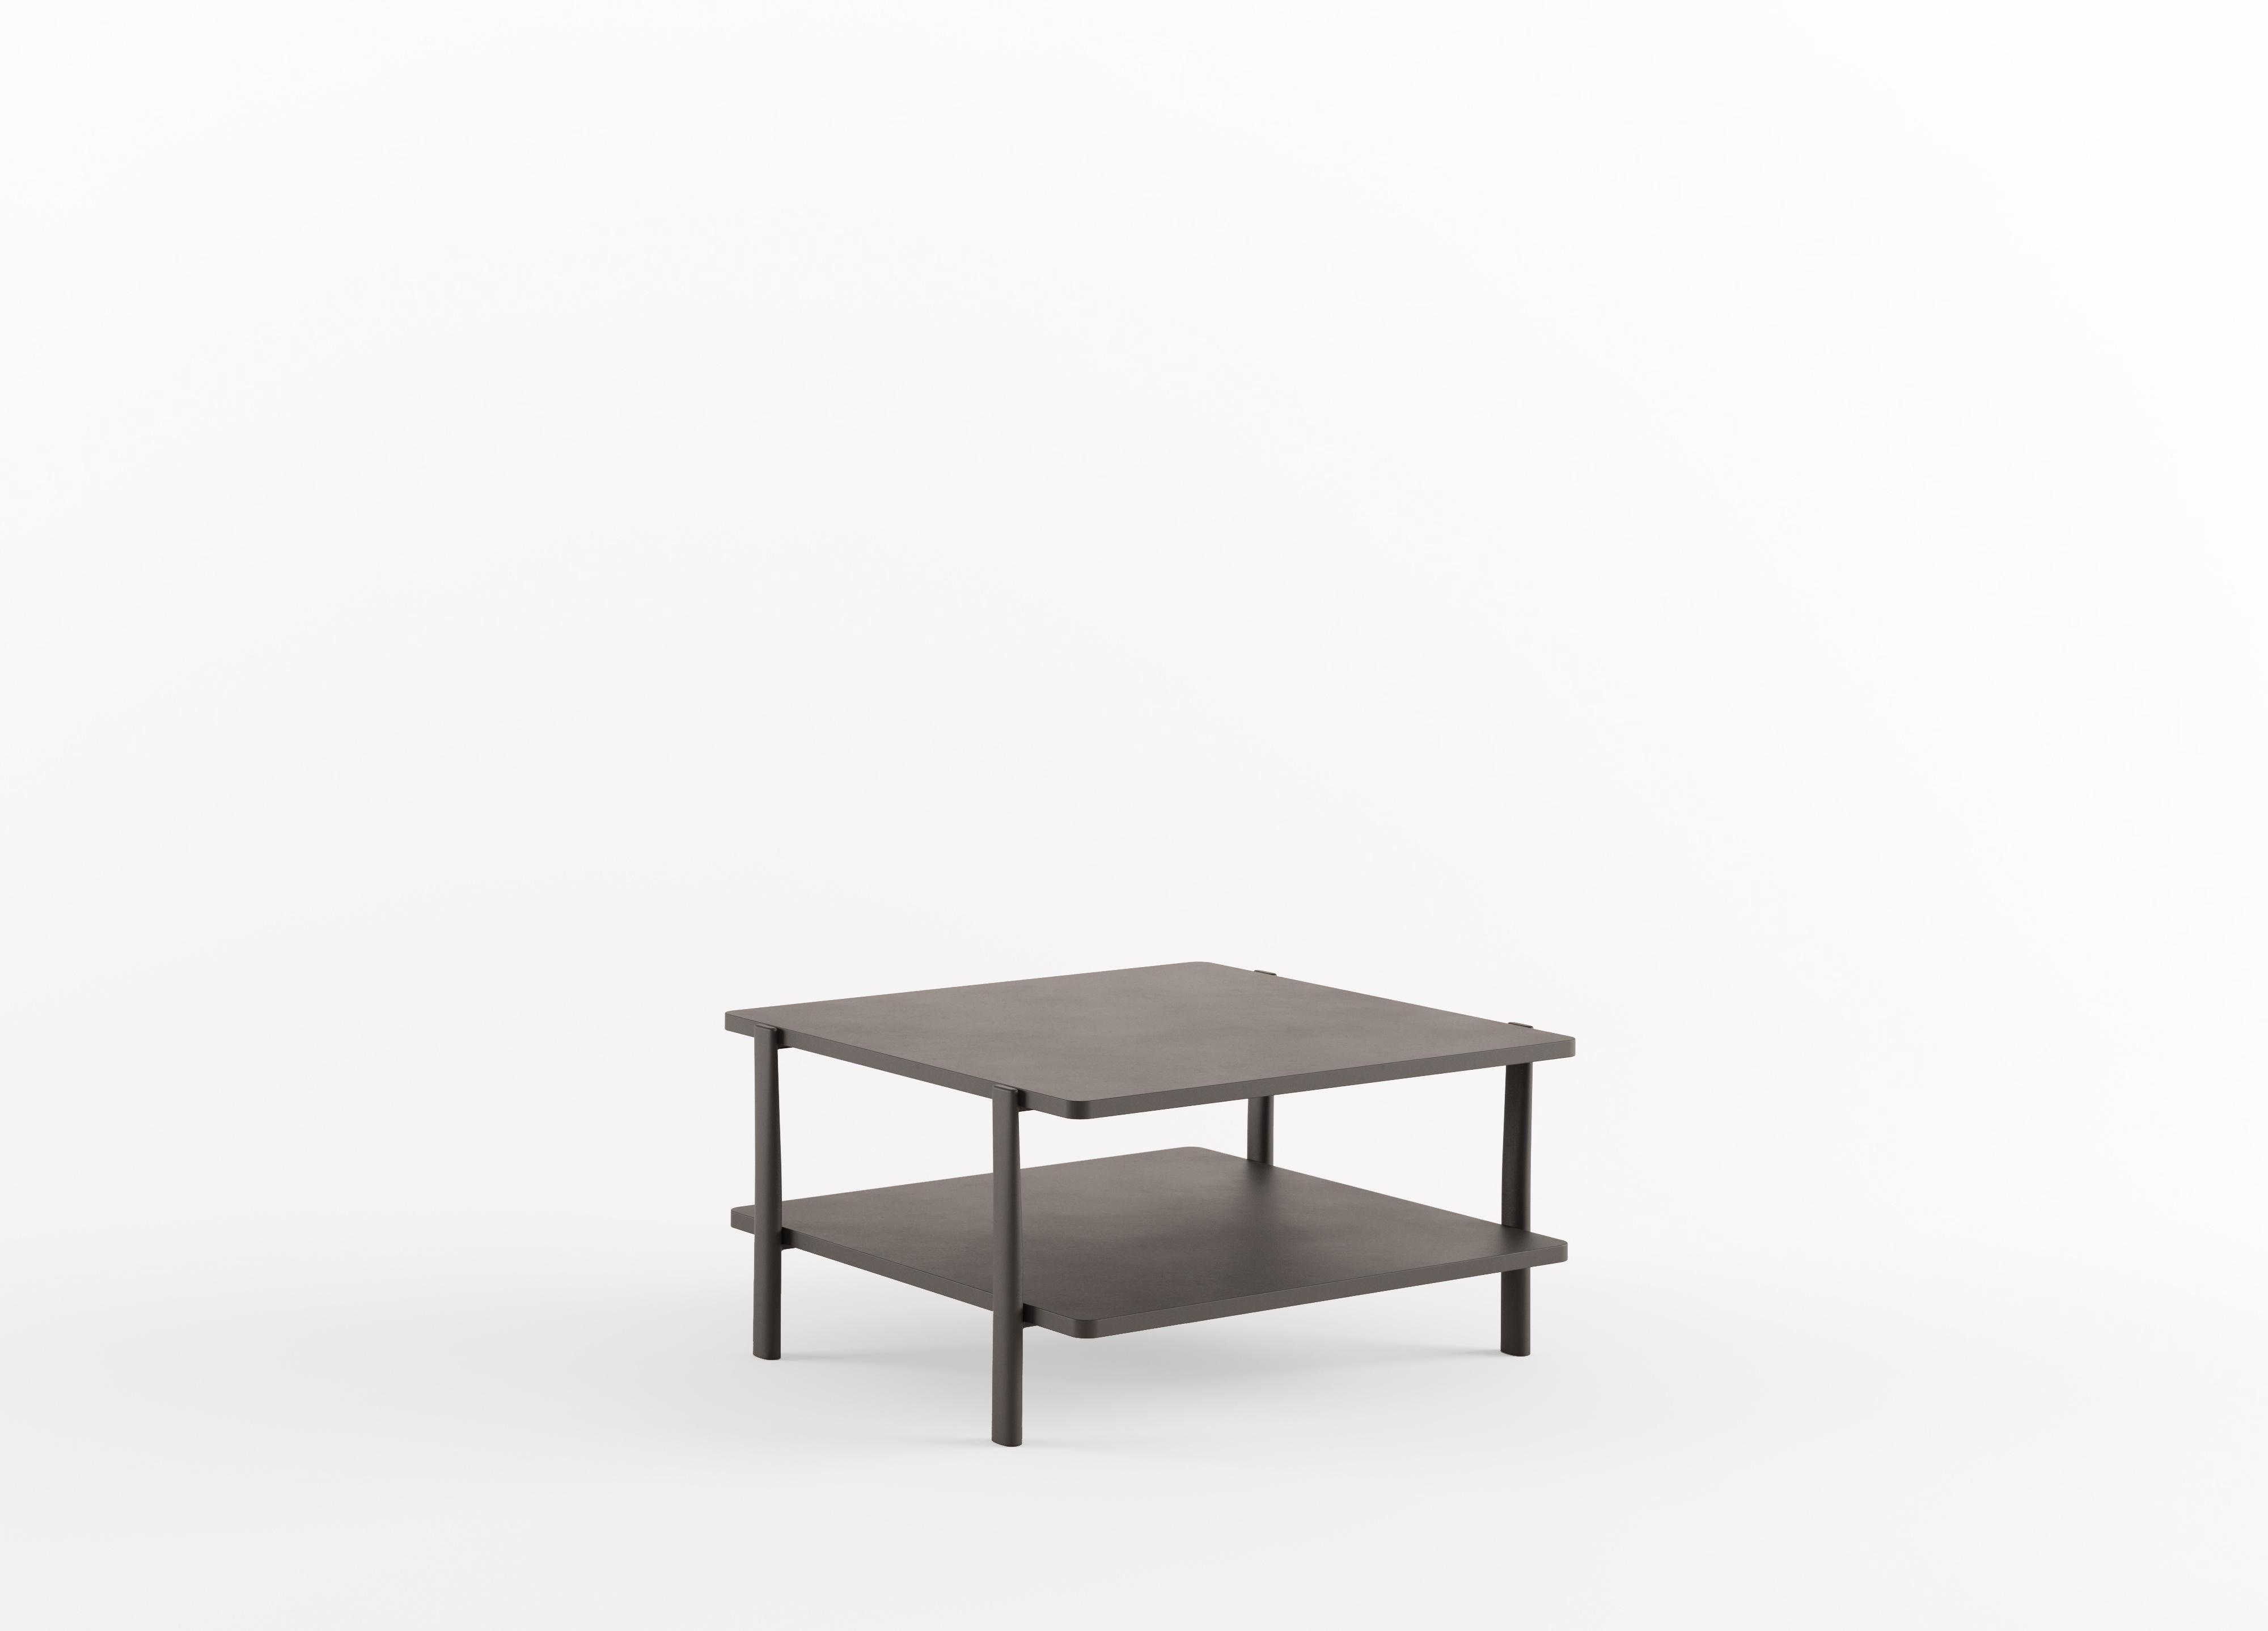 Alias 954 Eleven Low Table Double Square in Graphite Grey Lacquered Frame by PearsonLloyd

Coffee table with double round or square lacquered MDF tops; structure composed of lacquered or polished aluminium legs.

Tom Lloyd and Luke Pearson